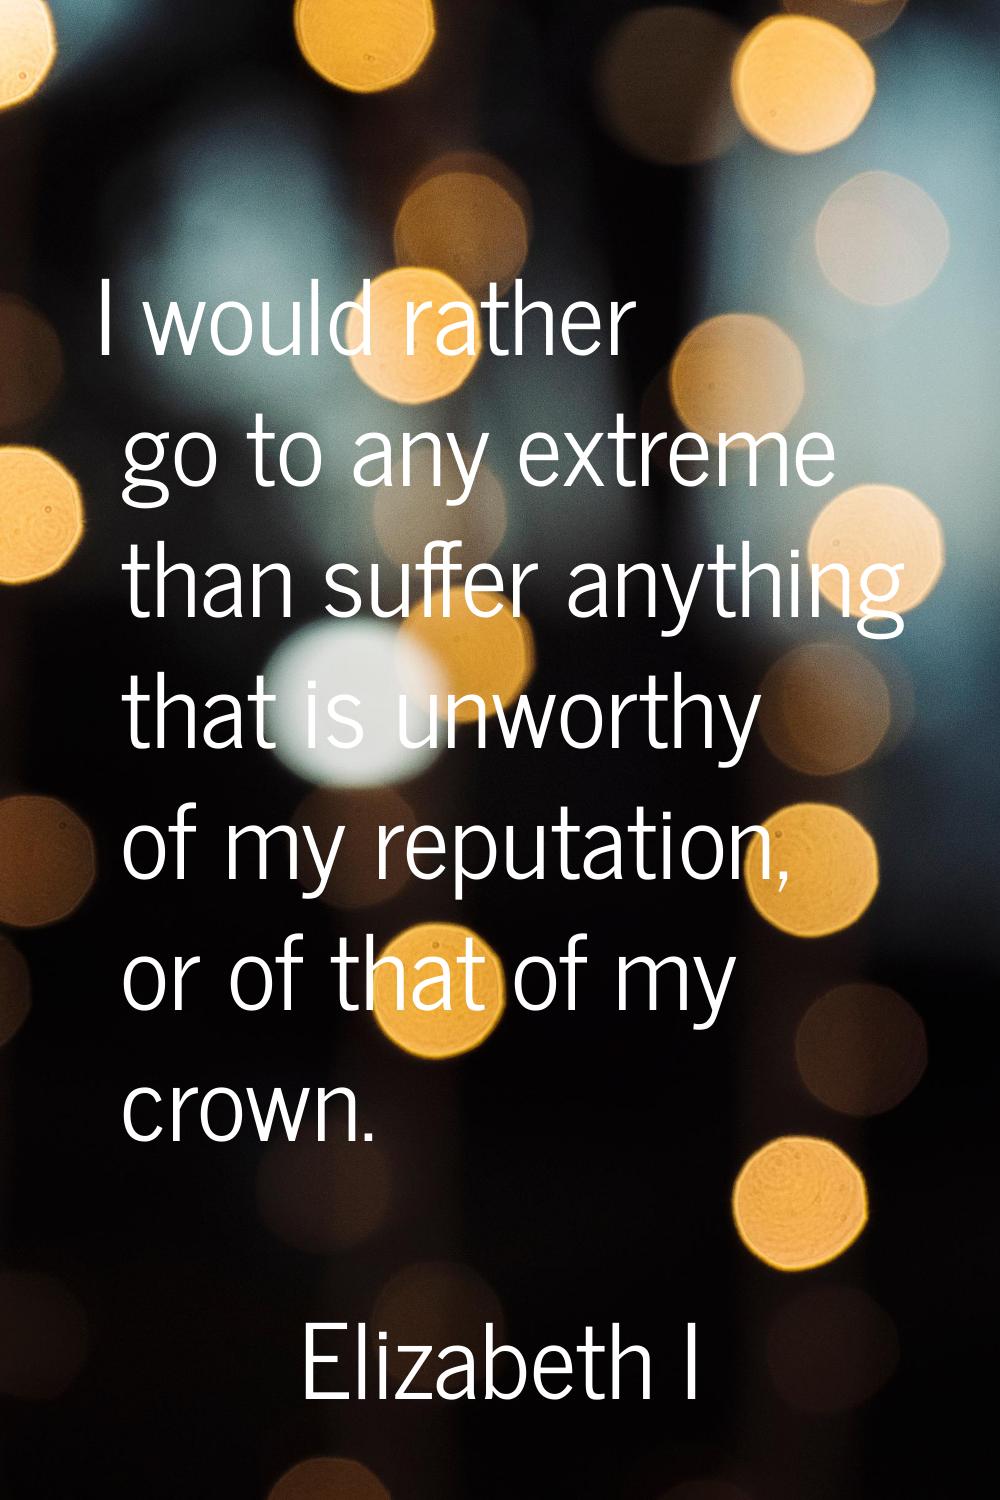 I would rather go to any extreme than suffer anything that is unworthy of my reputation, or of that